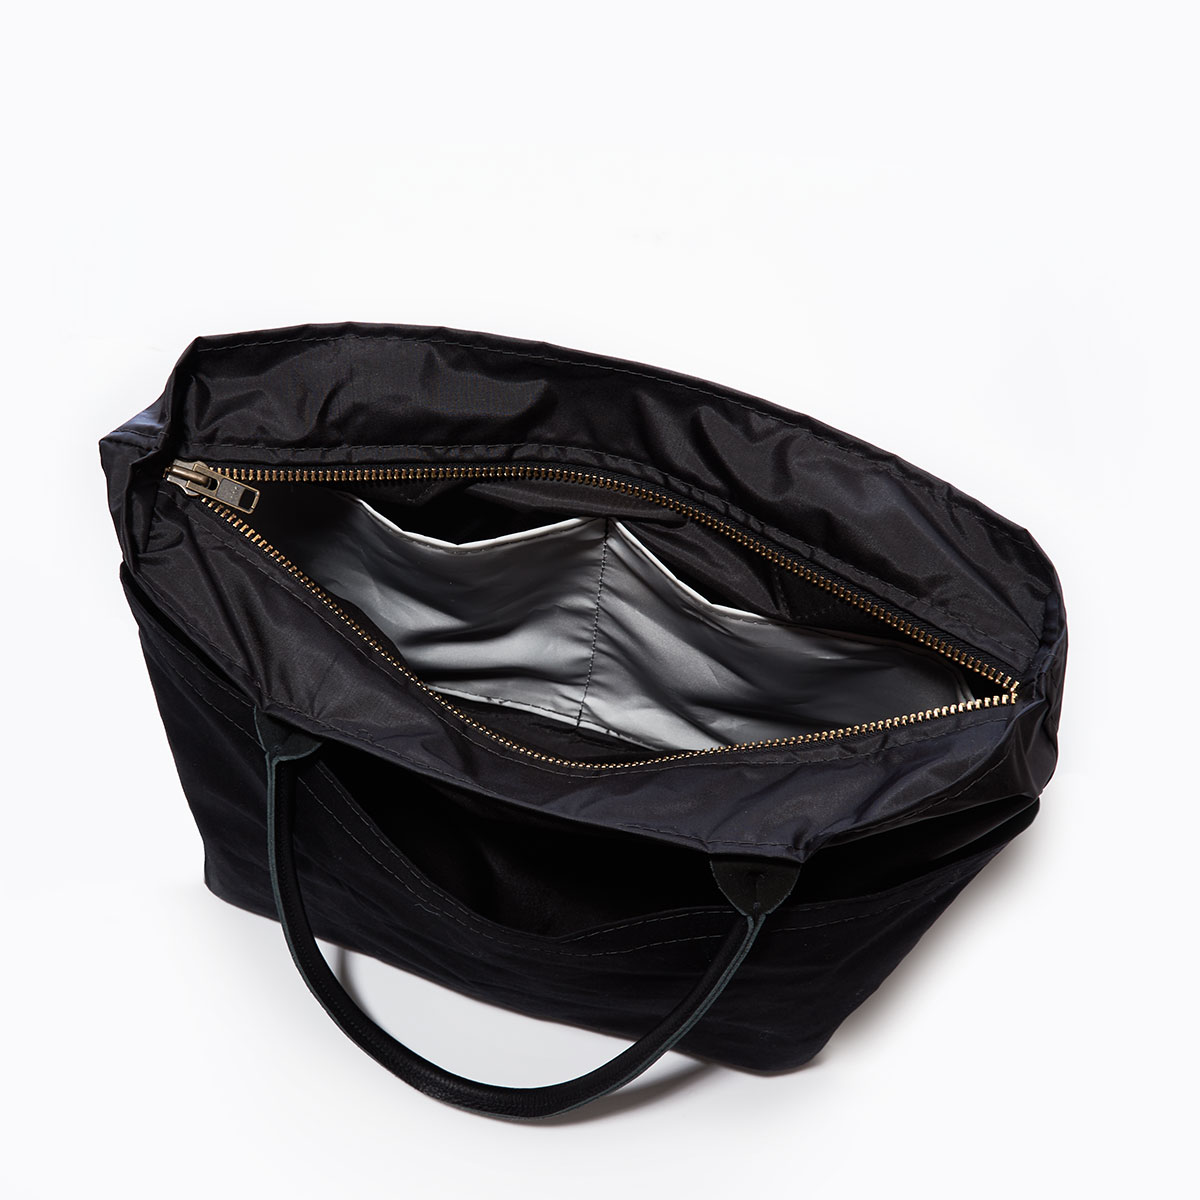 inside view showing interior side pockets of a black recycled sail cloth medium tote with a black canvas bottom and leather handles